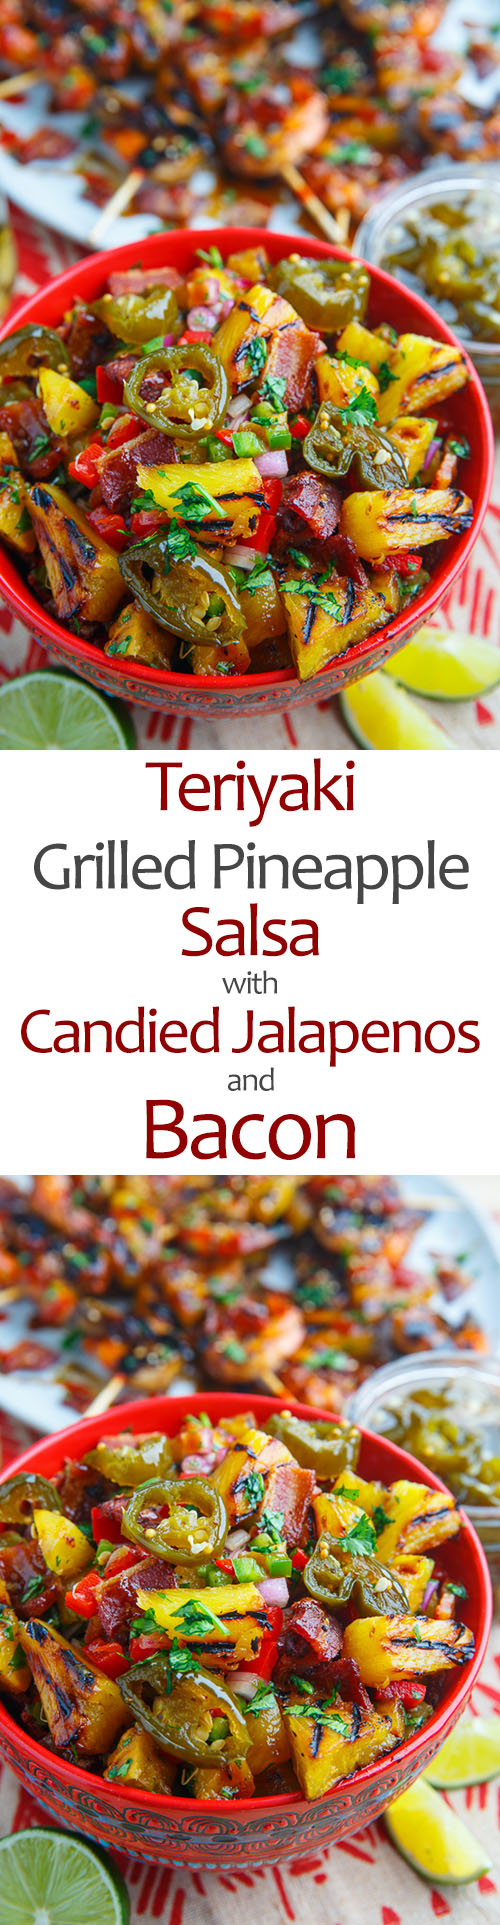 Teriyaki Grilled Pineapple Salsa with Candied Jalapenos and Bacon